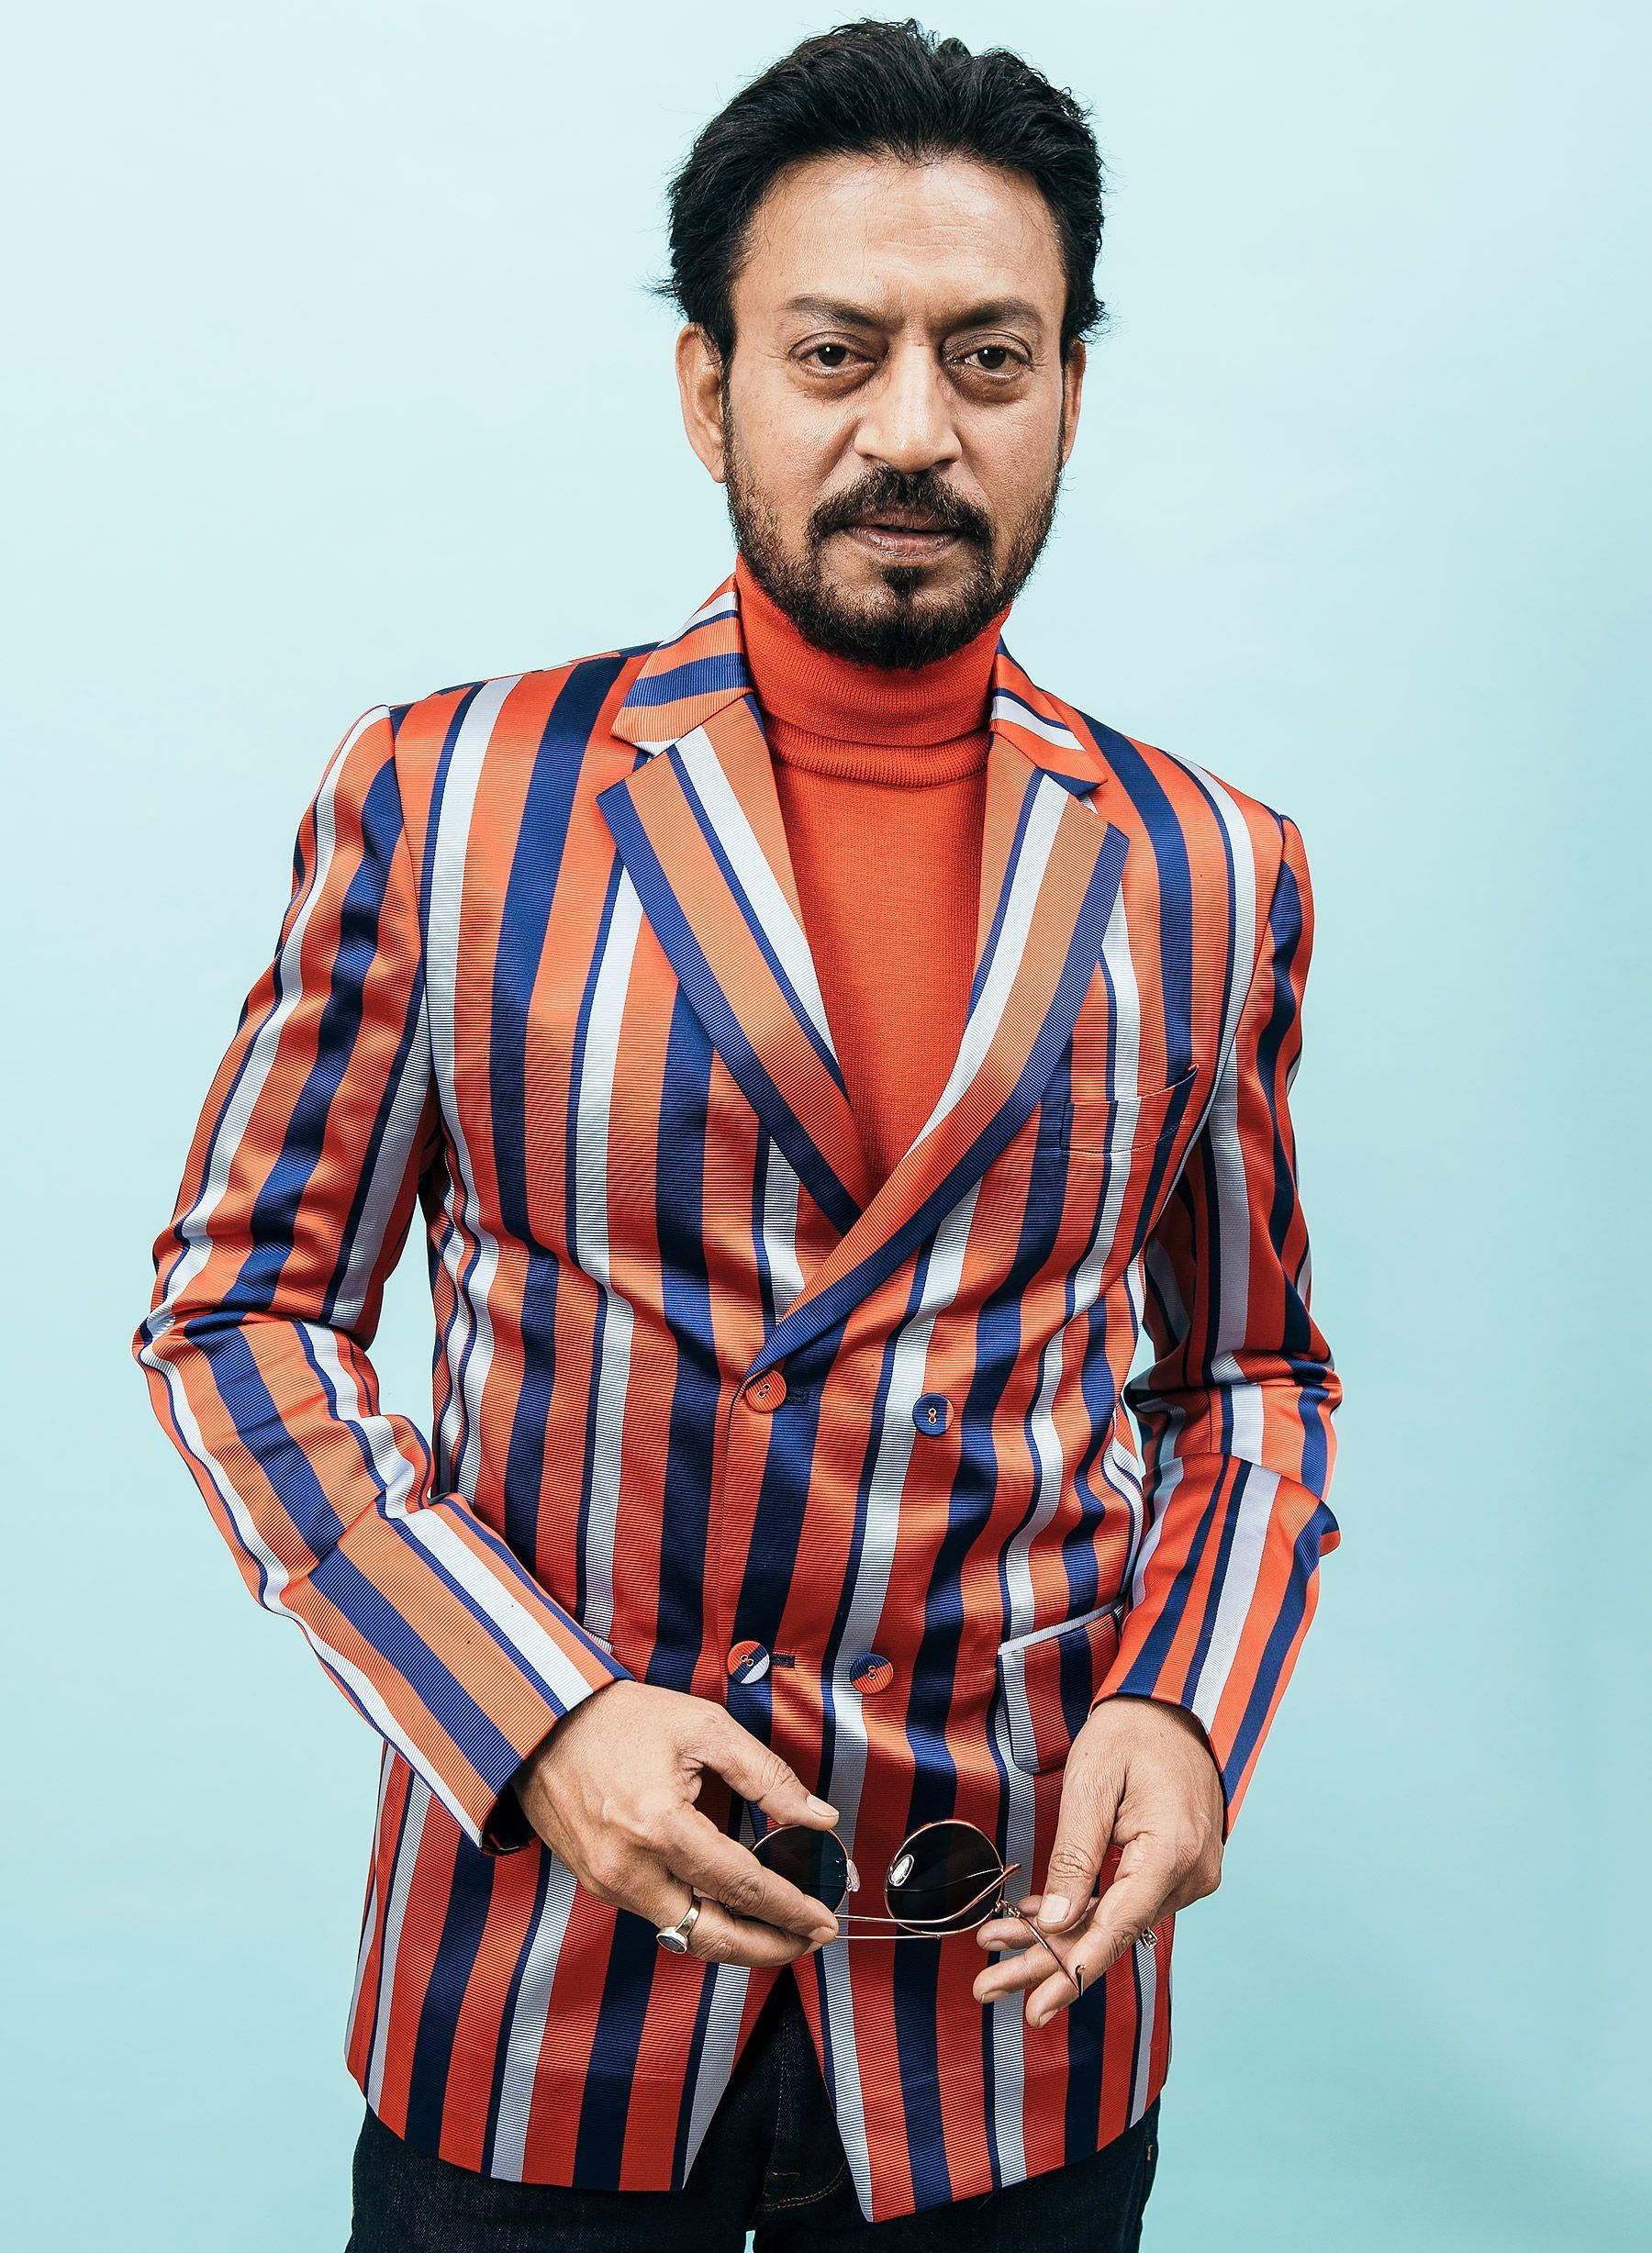 Bollywood Actor and Life of Pi Star Irrfan Khan Reveals Battle